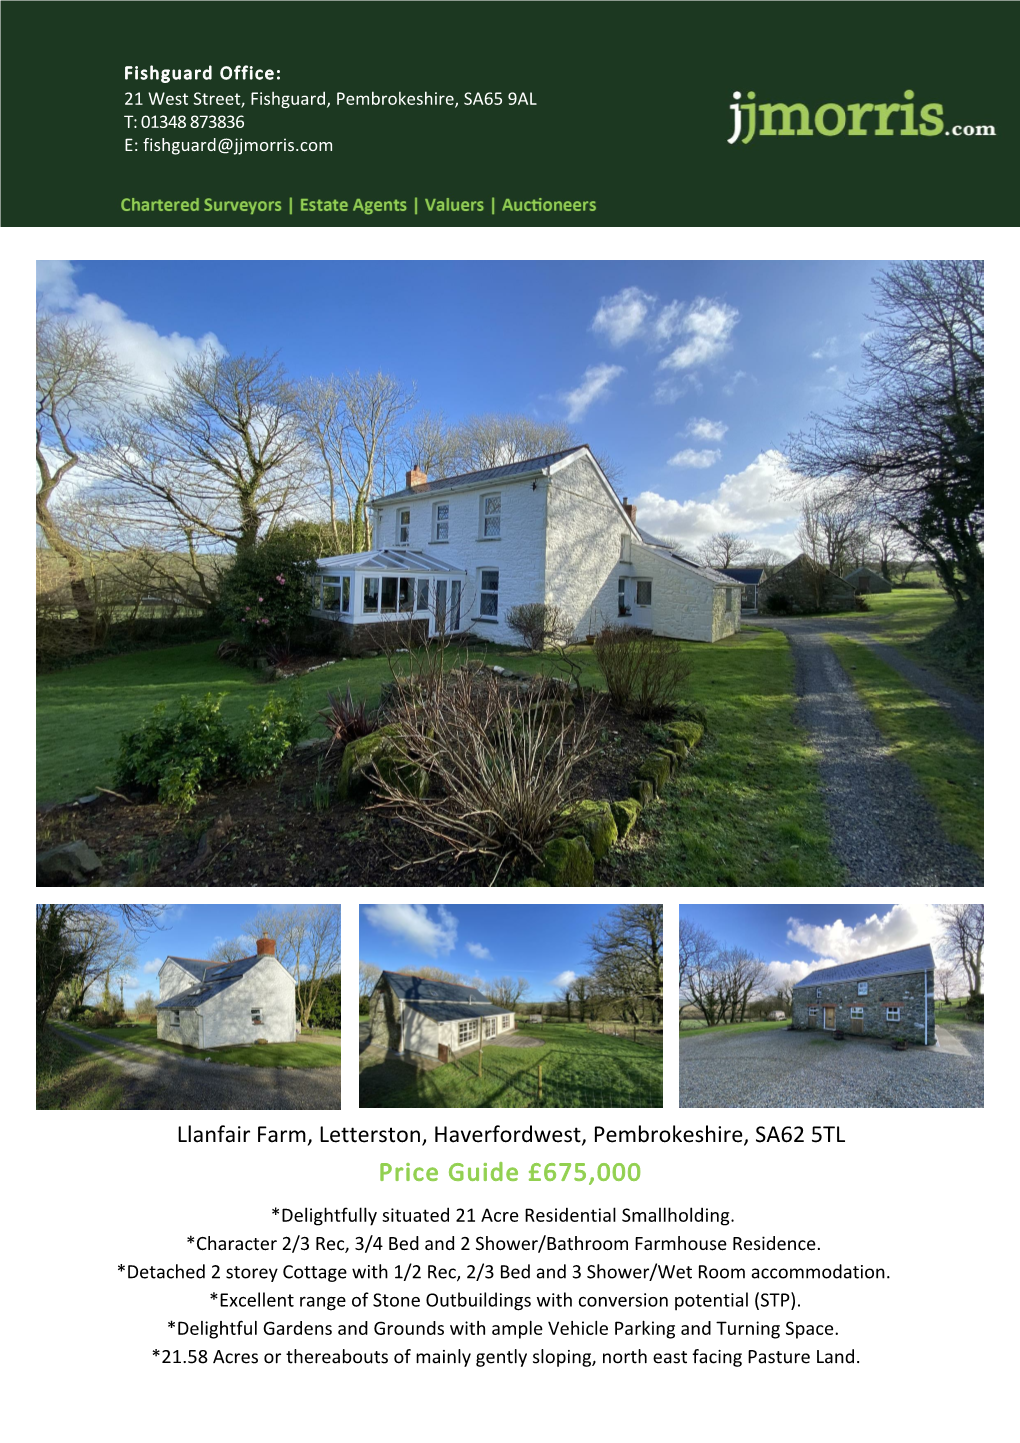 Llanfair Farm, Letterston, Haverfordwest, Pembrokeshire, SA62 5TL Price Guide £675,000 *Delightfully Situated 21 Acre Residential Smallholding